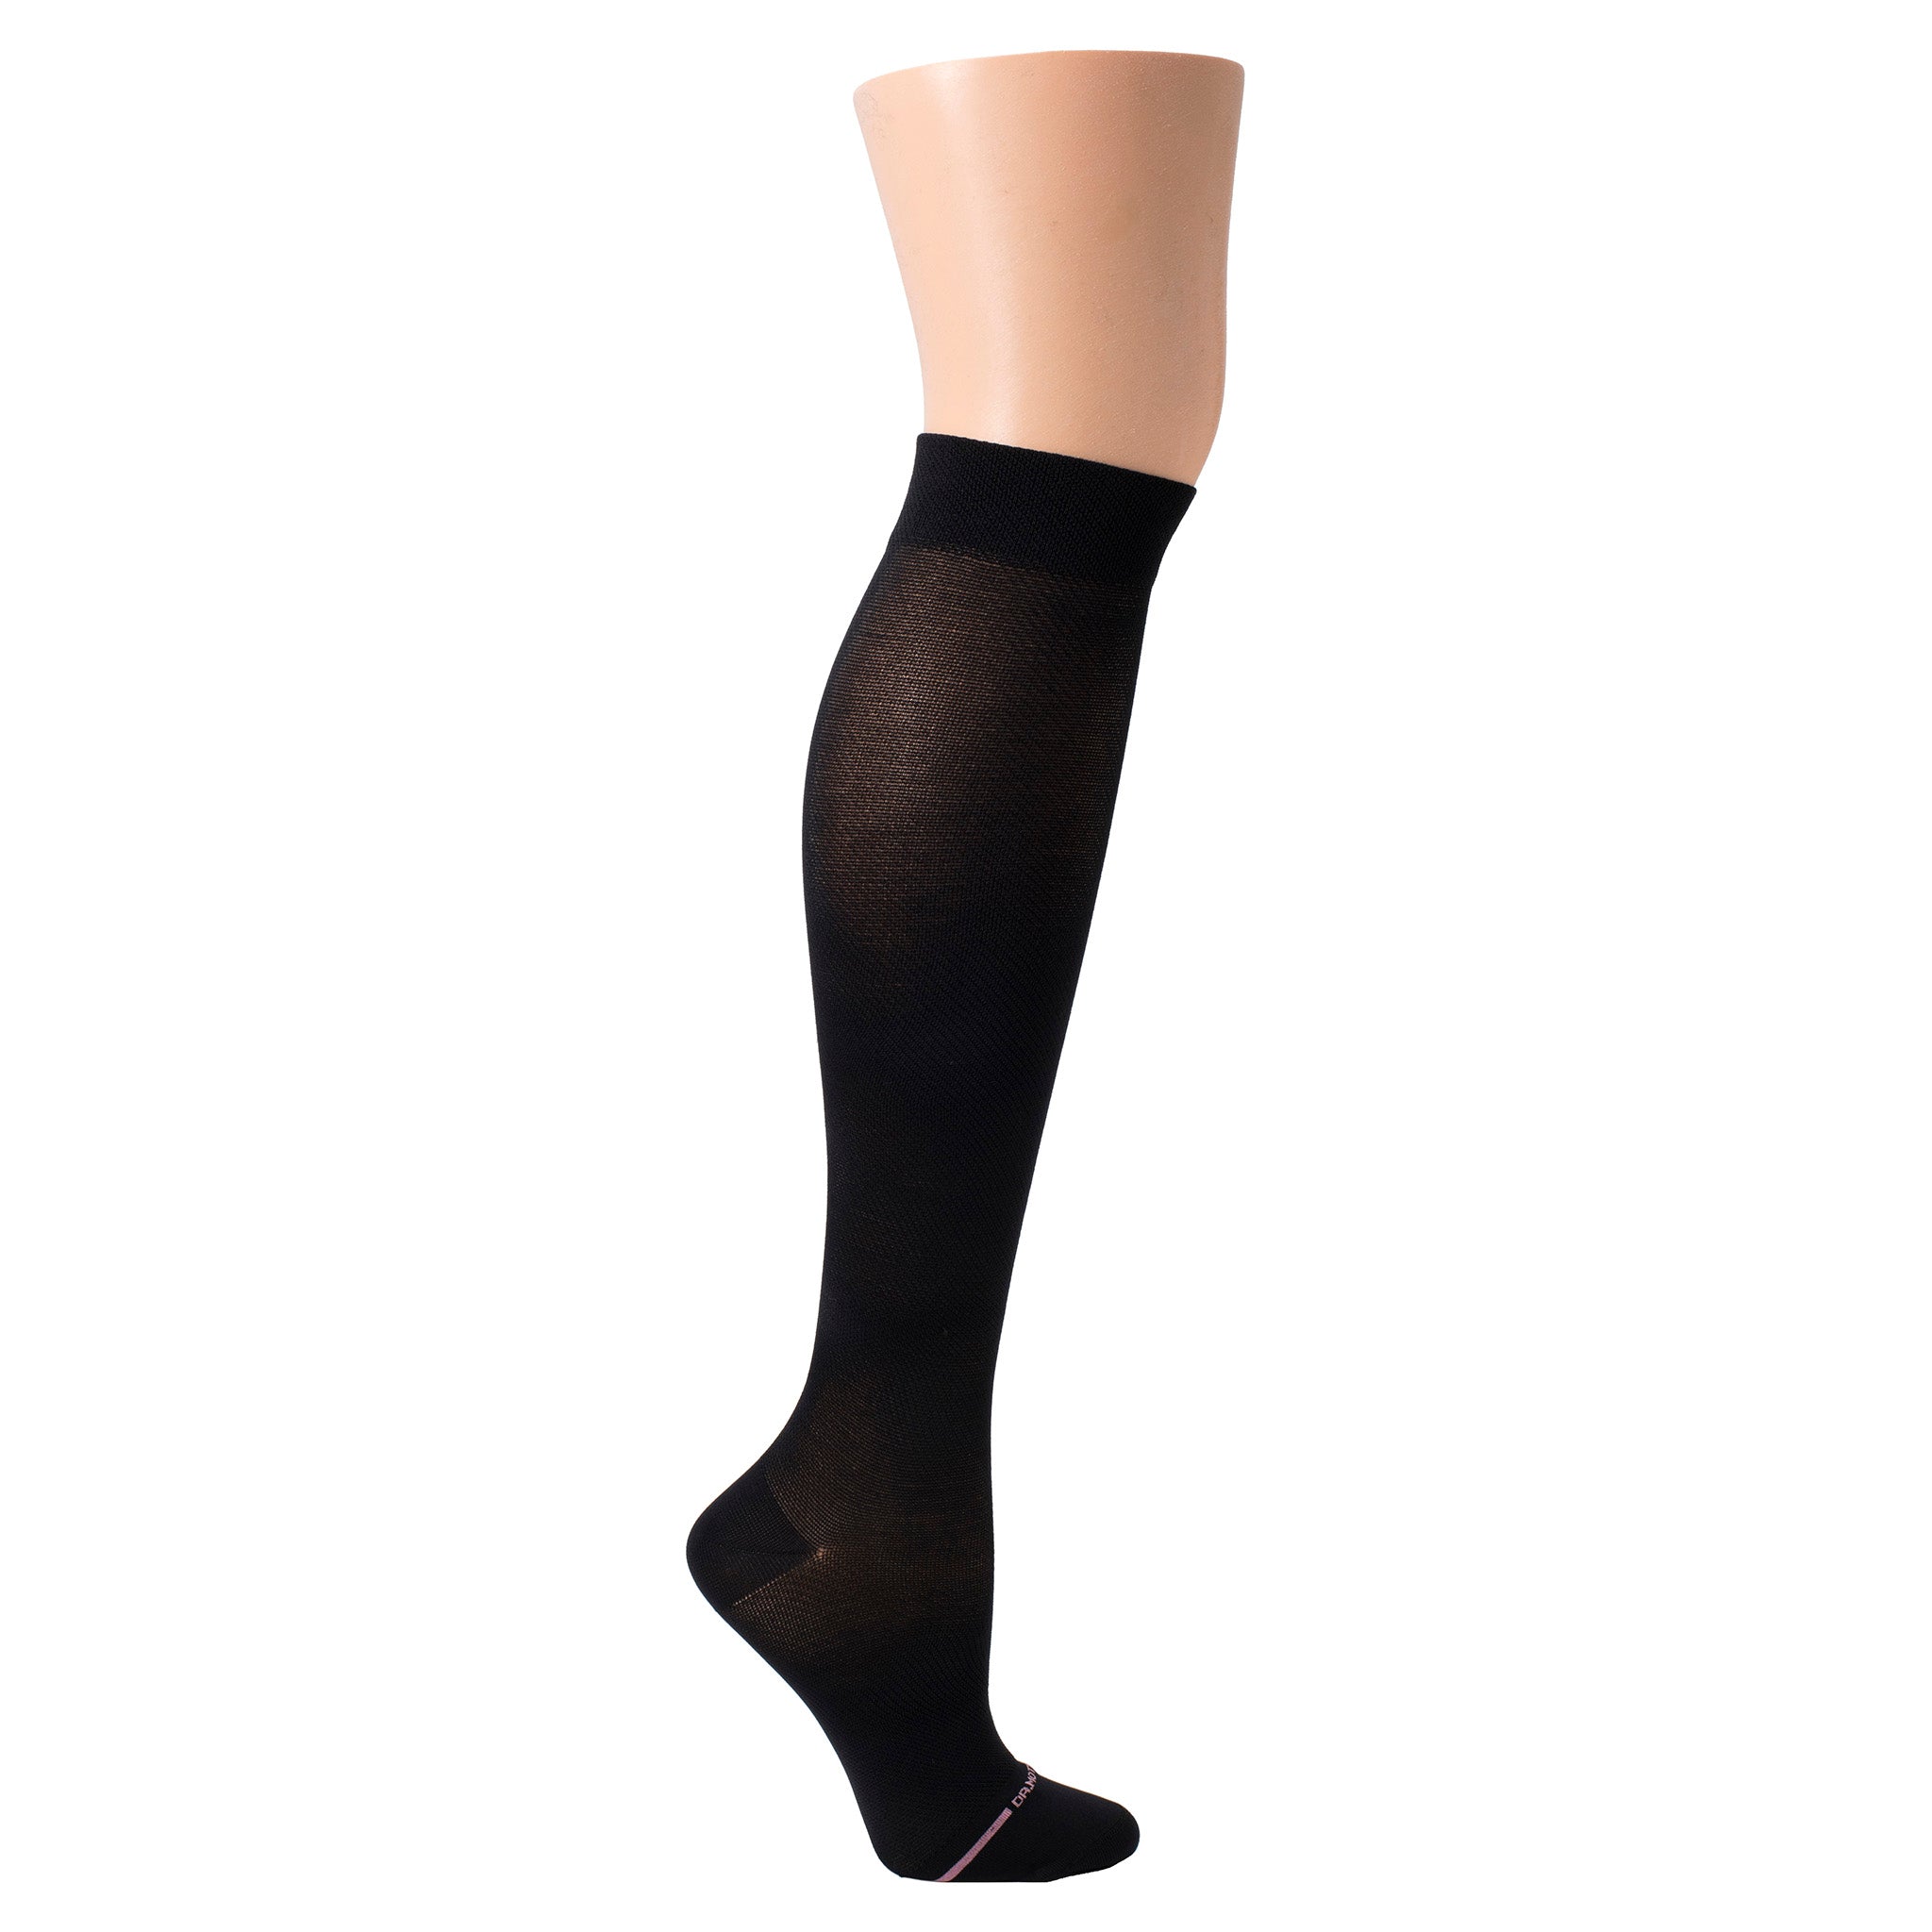 Capreze Stockings Circulation Stocking Silicone Women Men Elastic  Compression Socks Second-level Pressure Unisex Knee High Pain Relief  23-32mmHg Solid Color Womens Mens Open-toed Skin Color M 